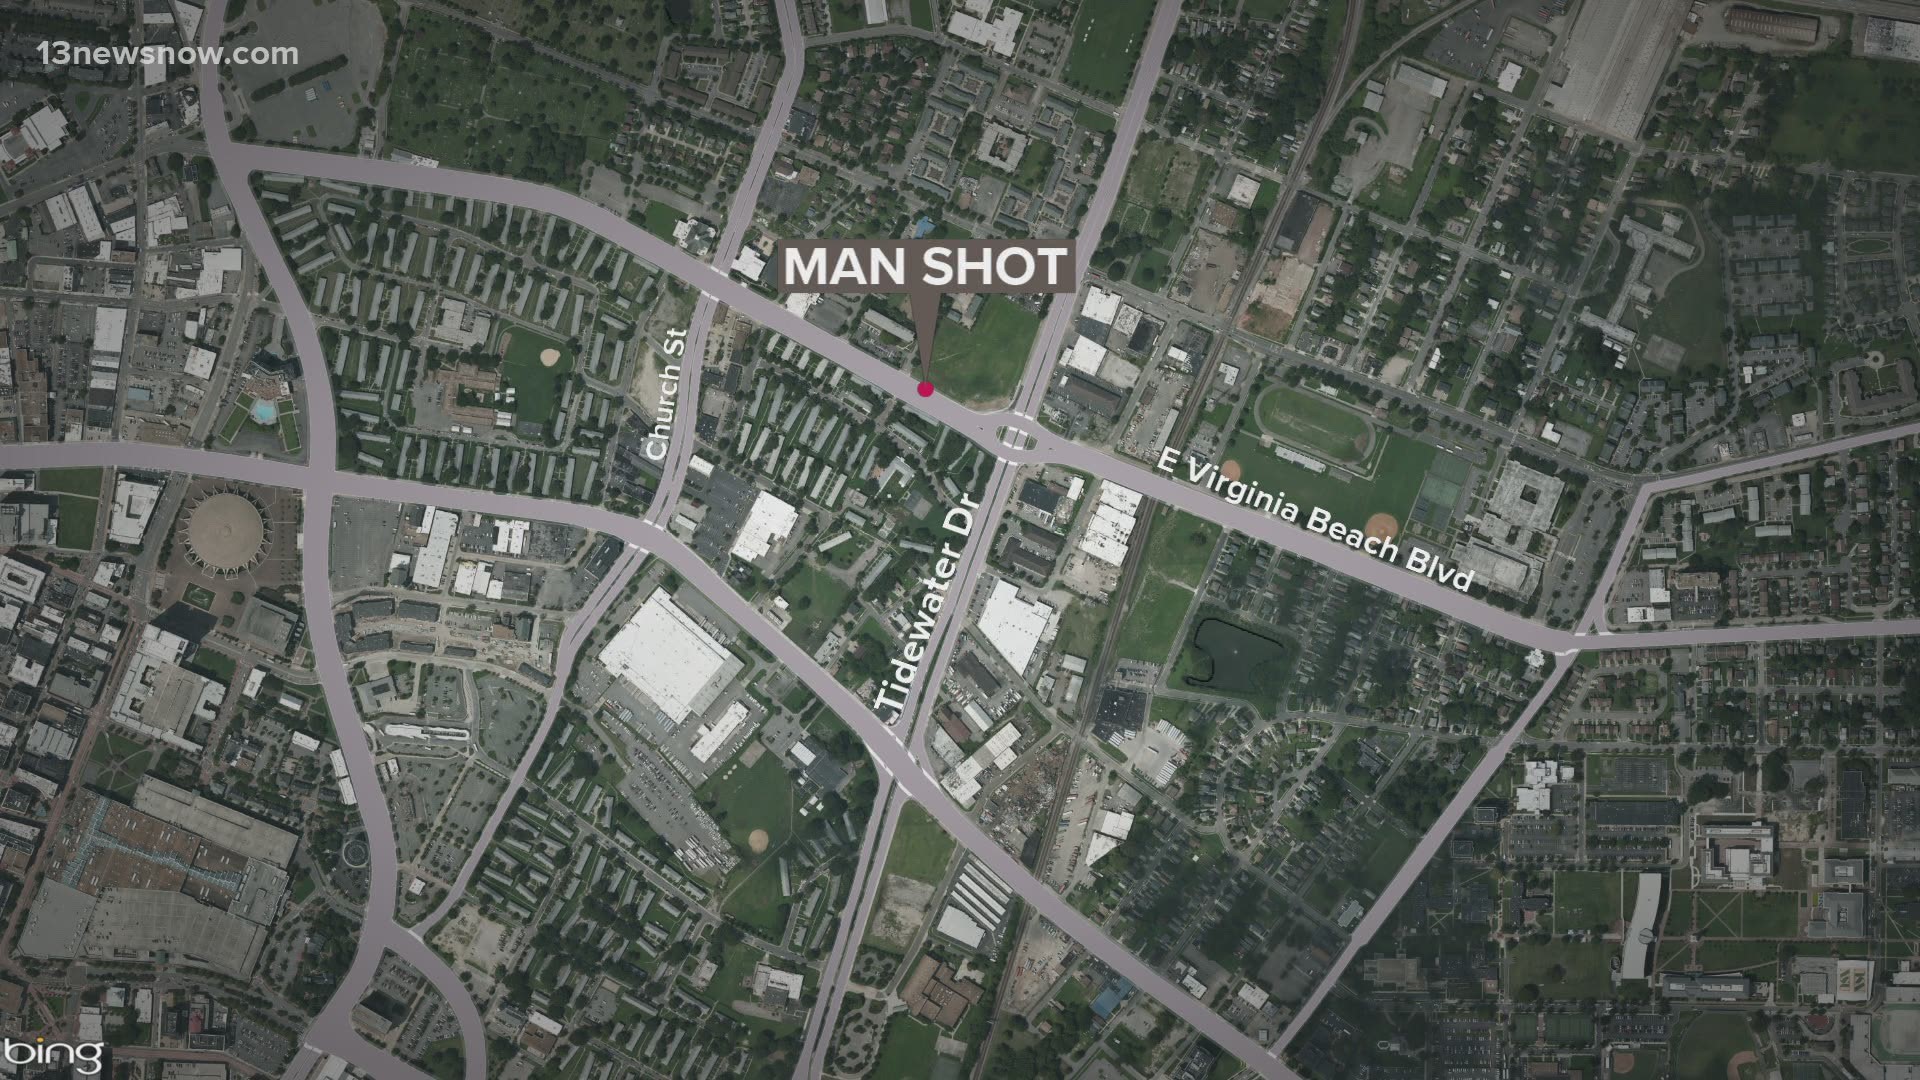 A person is in the hospital with serious injuries after being shot in Norfolk on Monday night, police said.